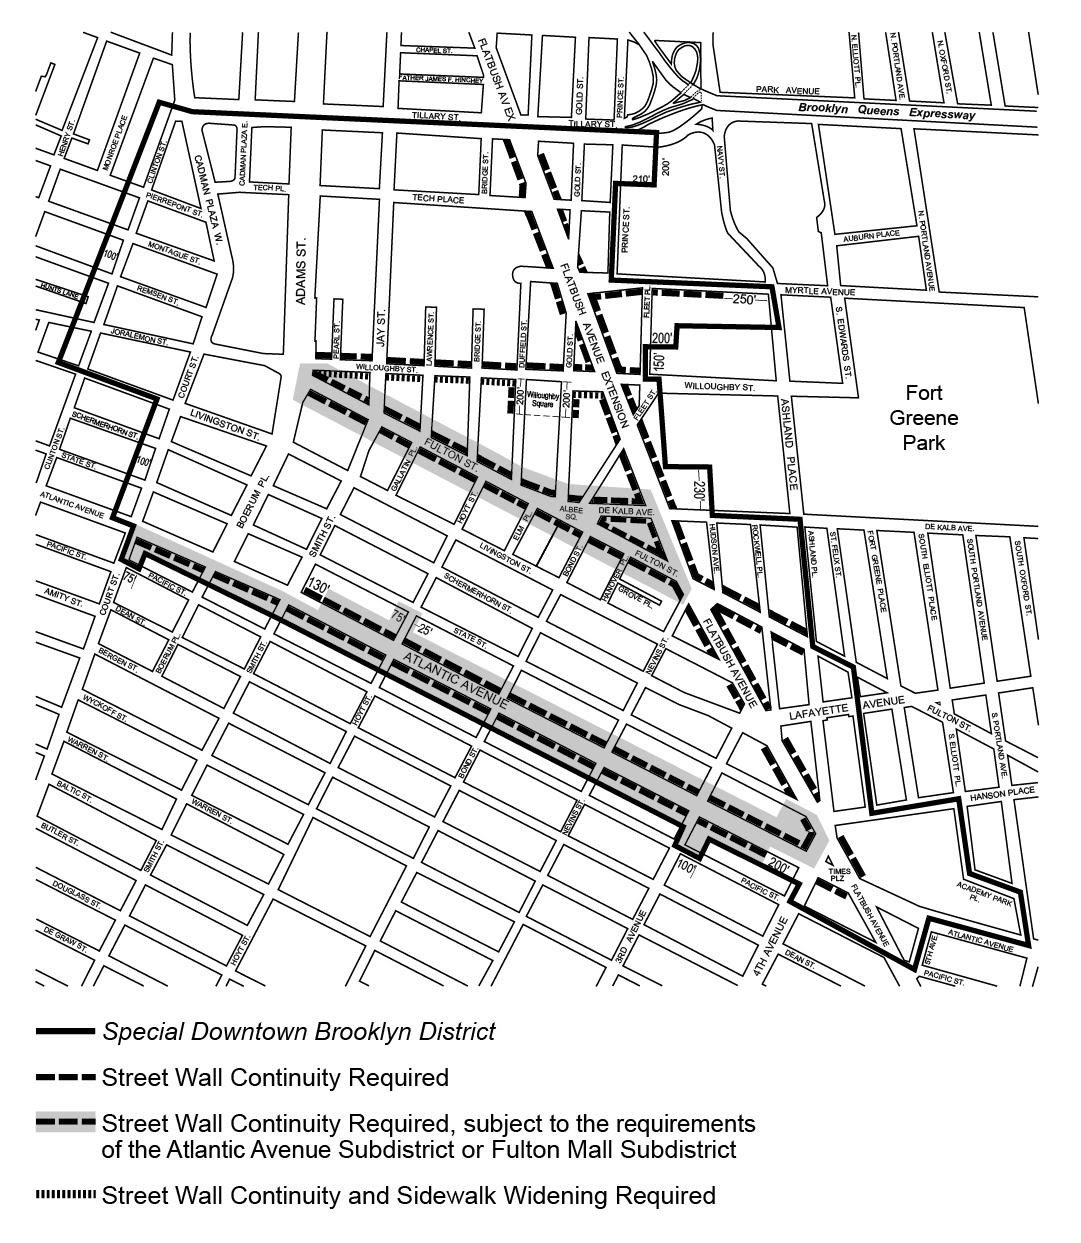 Zoning Resolutions Chapter 1: Special Downtown Brooklyn District Appendix E.3